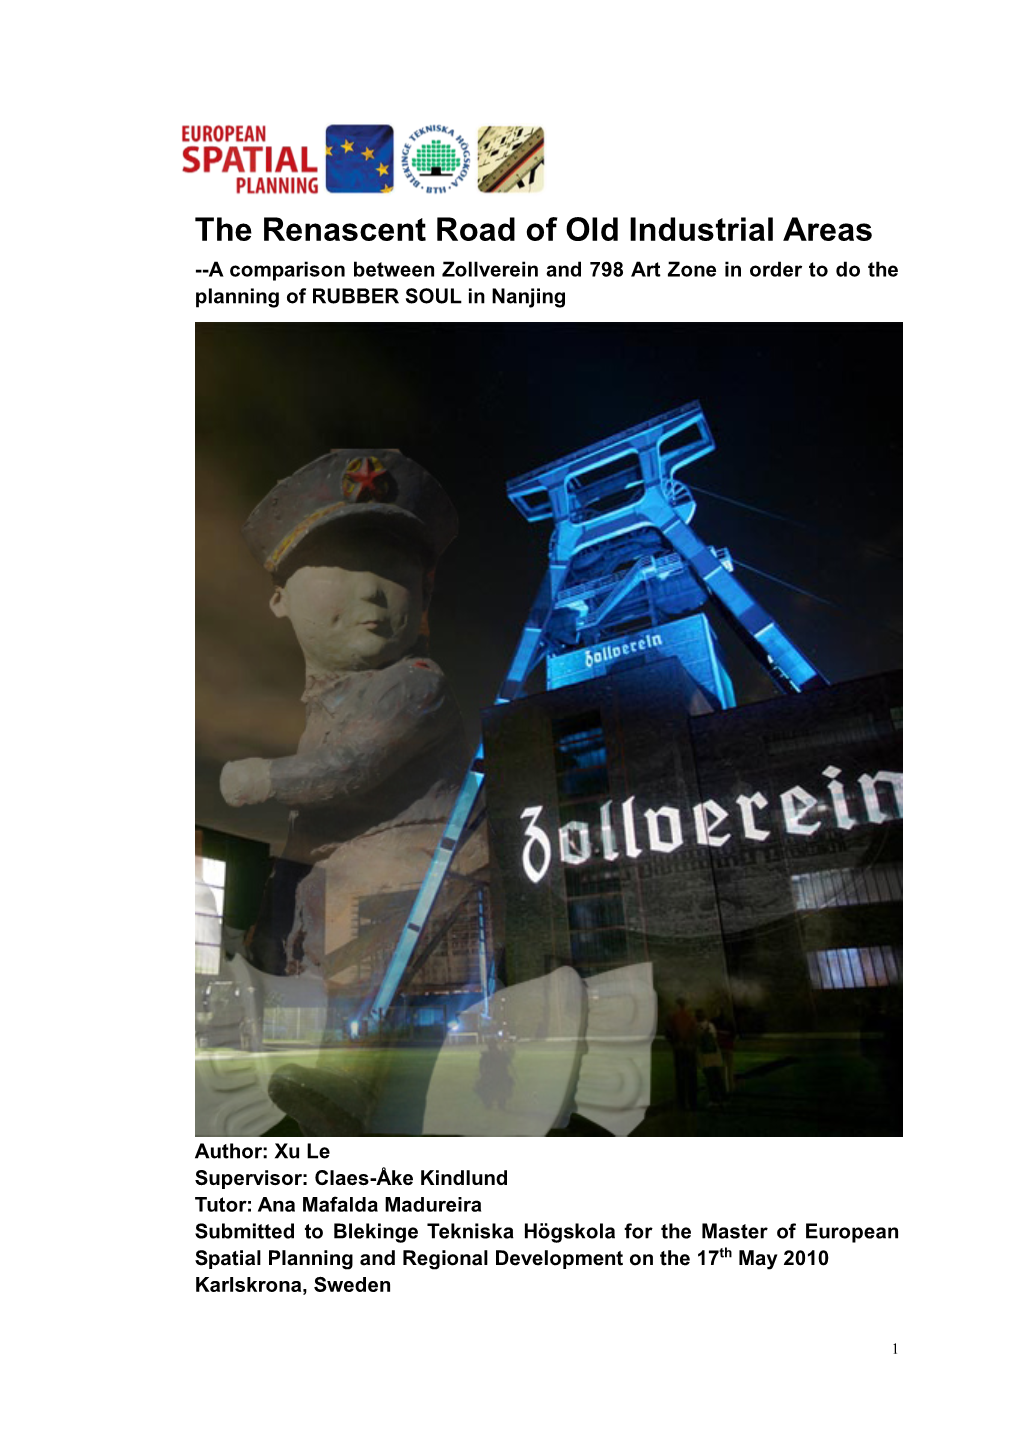 The Renascent Road of Old Industrial Areas --A Comparison Between Zollverein and 798 Art Zone in Order to Do the Planning of RUBBER SOUL in Nanjing